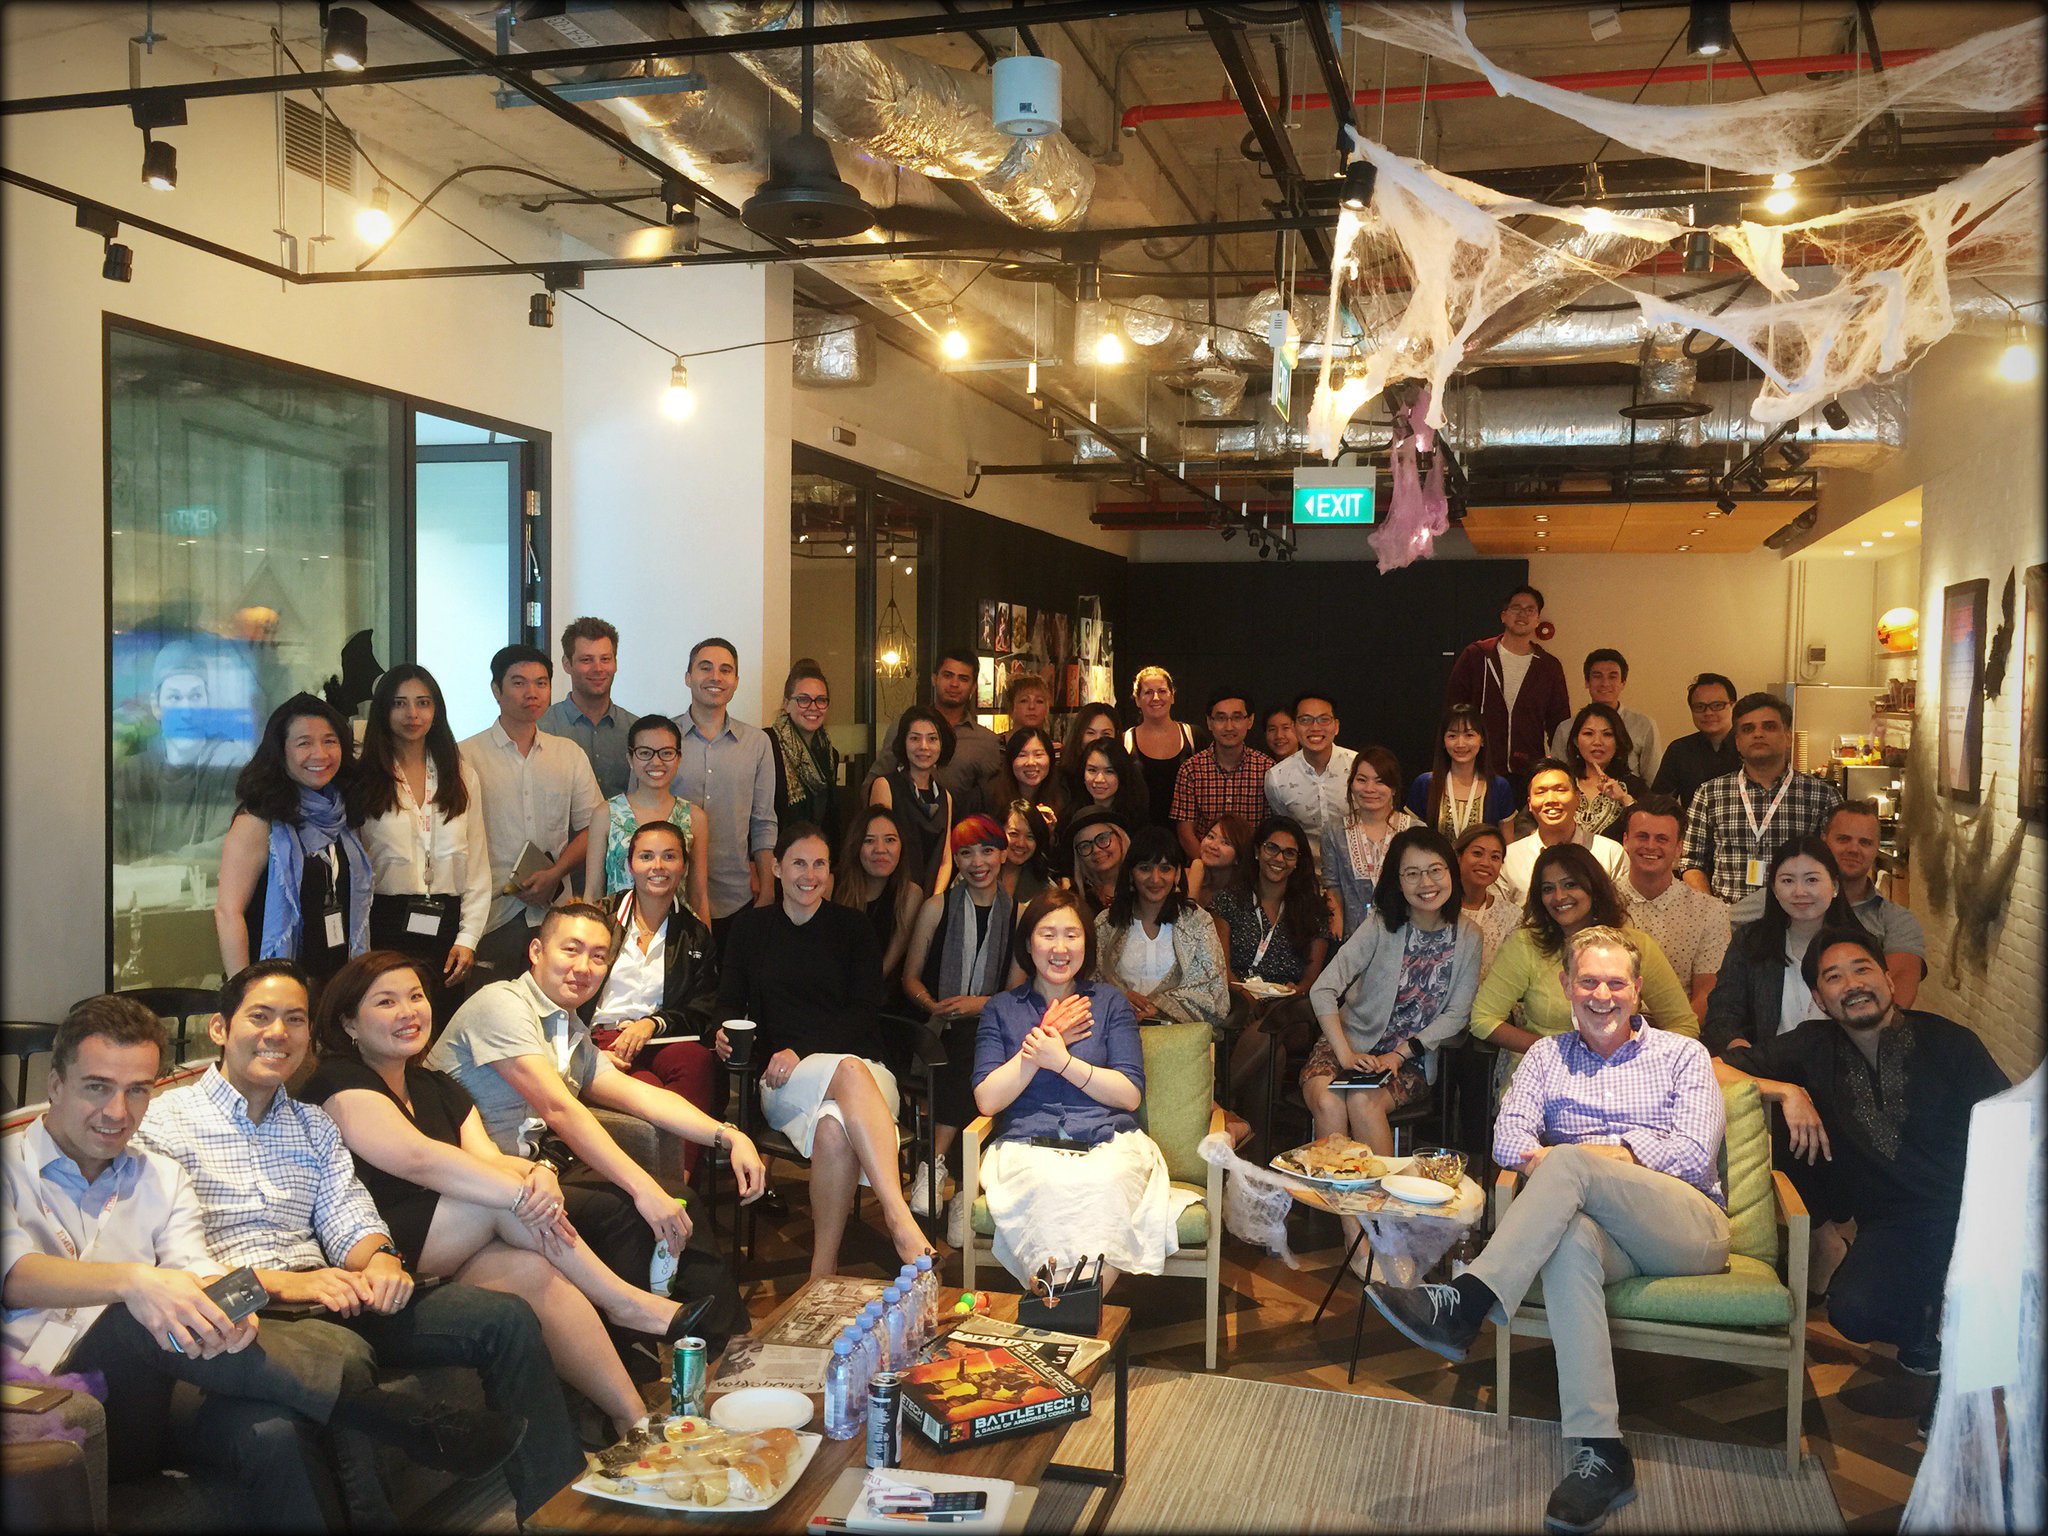 We Are Netflix on Twitter: "Greetings from our #Singapore office! #